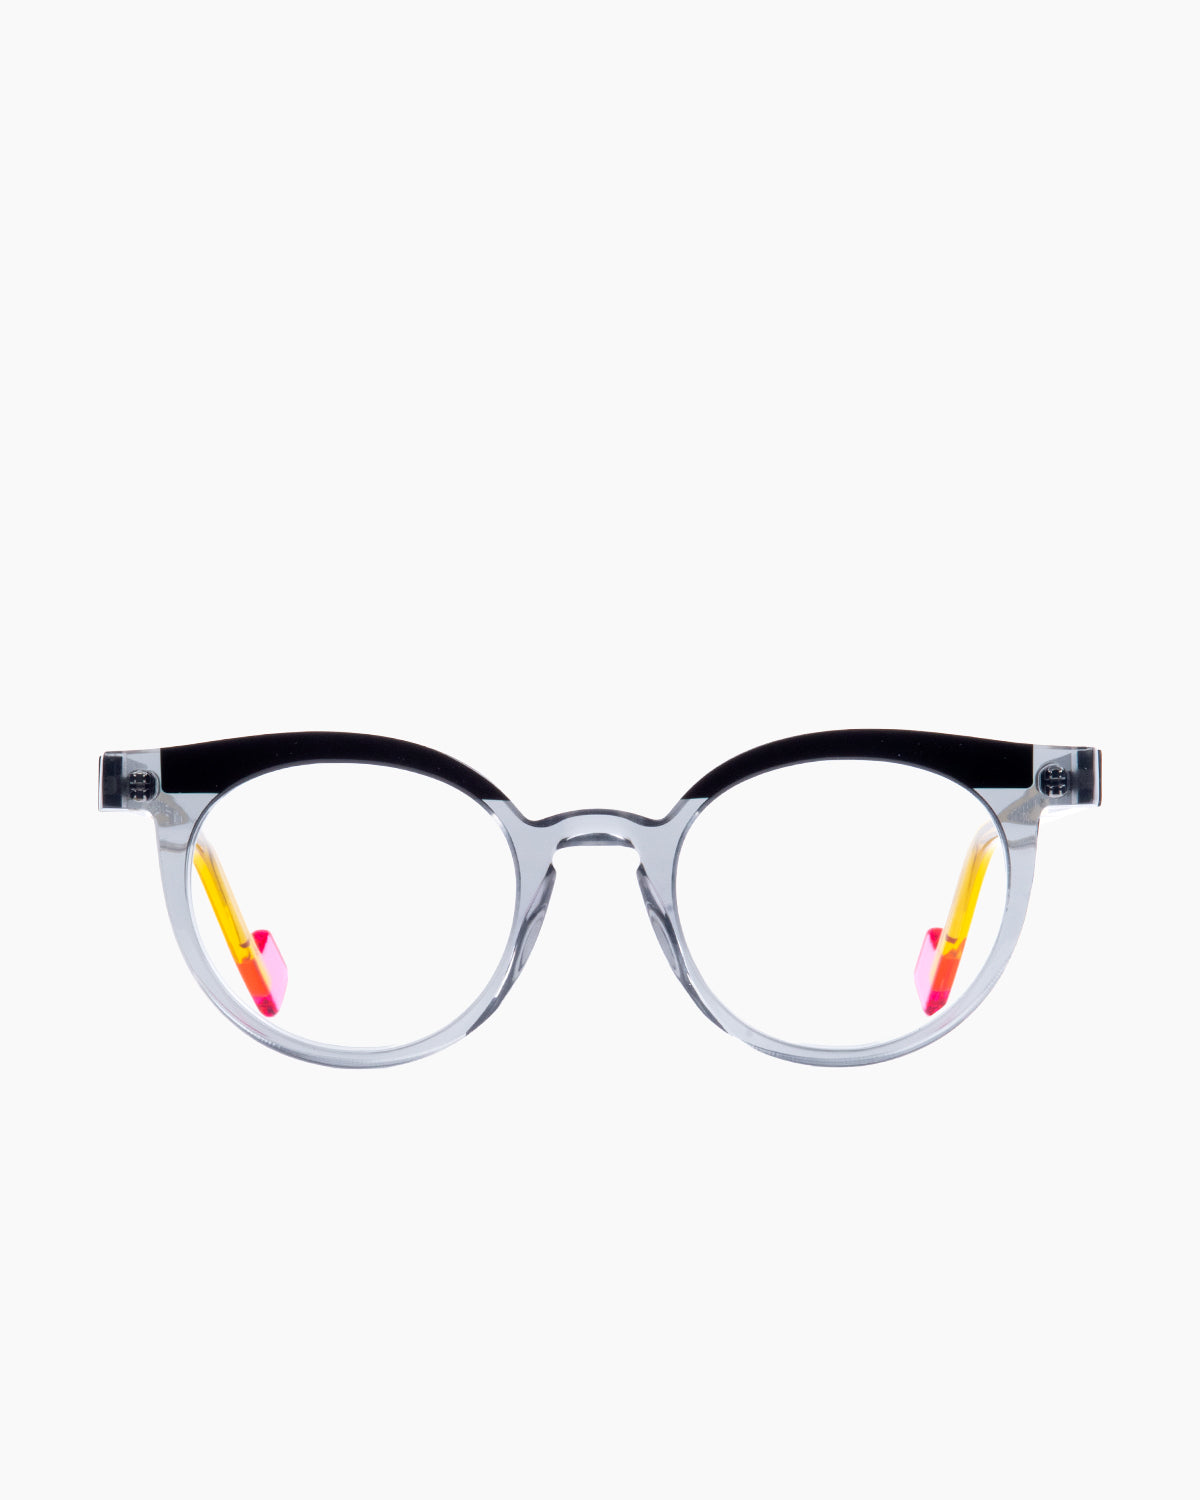 Anne and Valentin - LEVEL - 21A05 | glasses bar